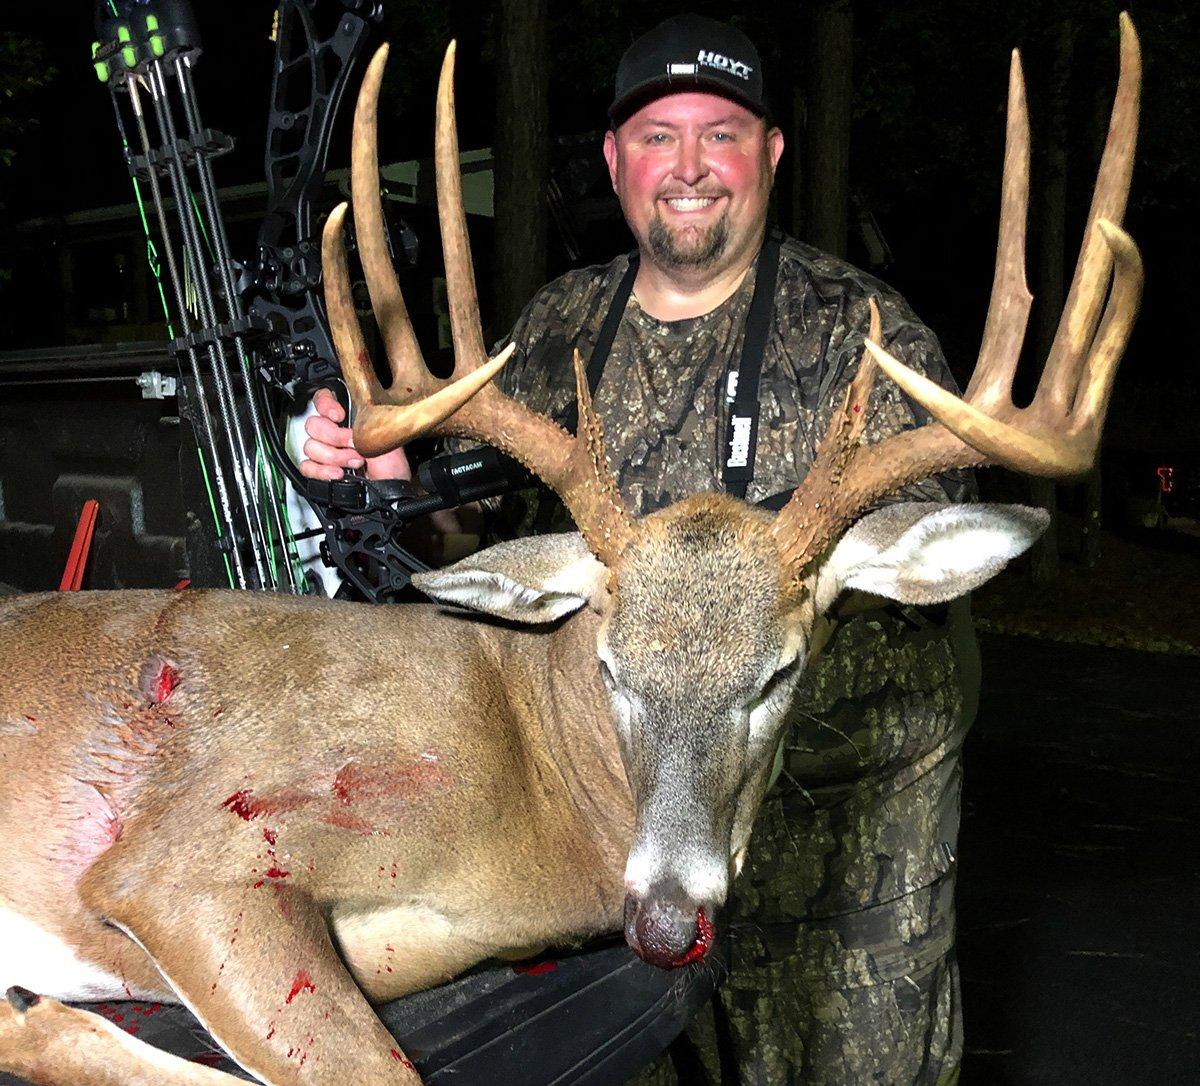 Back in Georgia, this nice buck was known to roam, so T-Bone went after him first. (Bone Collector photo)